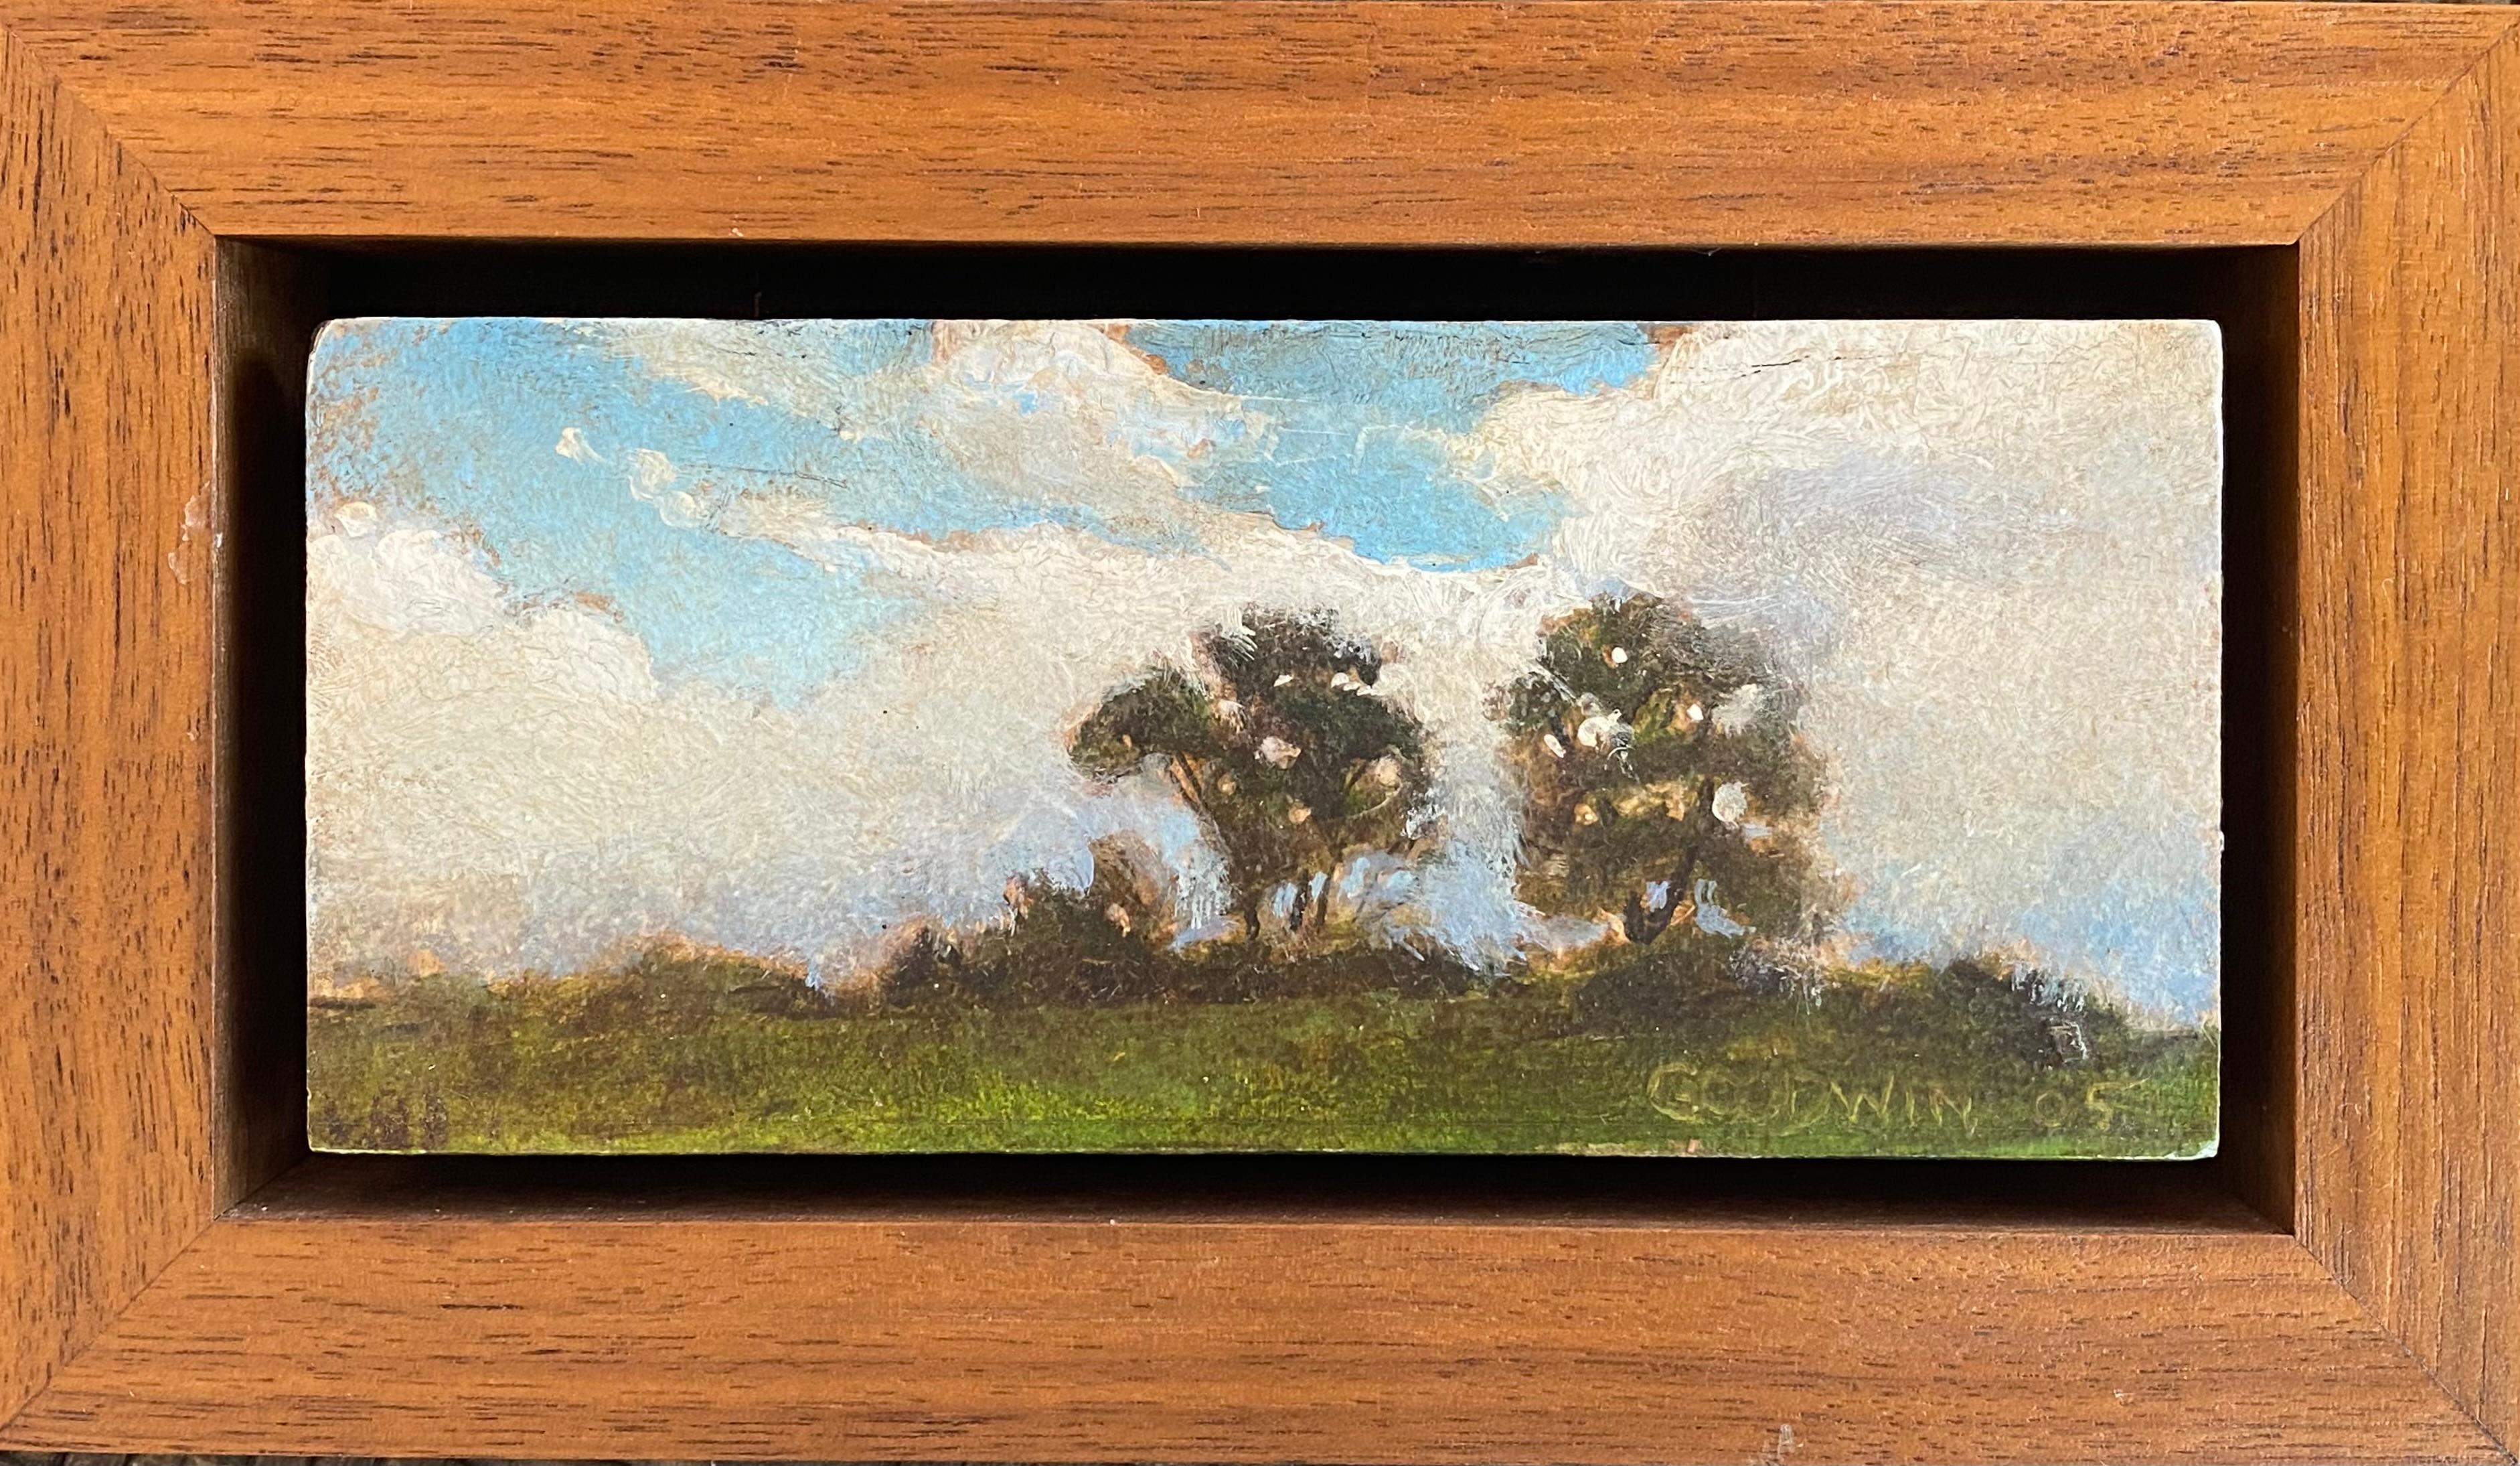 “Hilltop Trees” - Painting by Unknown